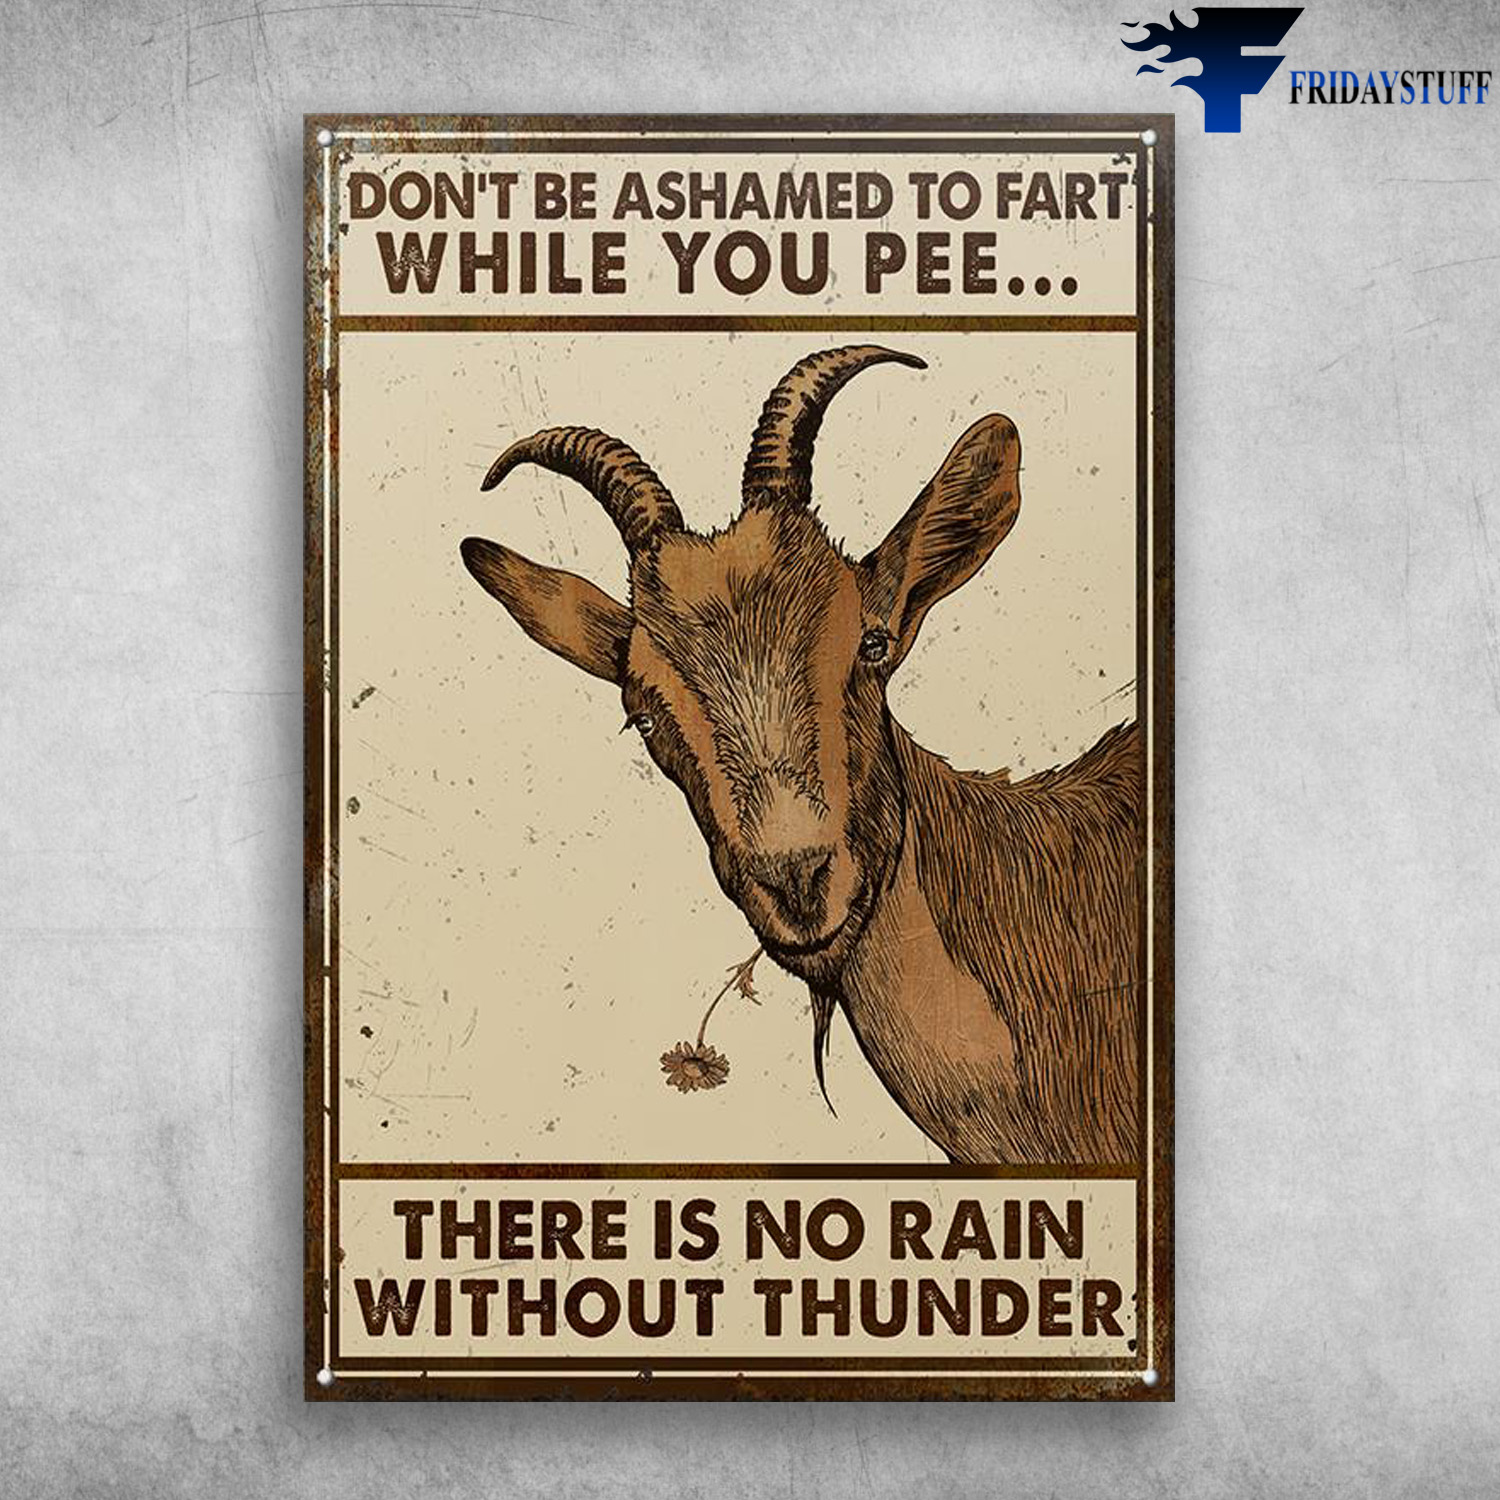 The Goat Sketch - Don't Be Ashamed To Fart While You Pee, There Is No Rain Without Thunder